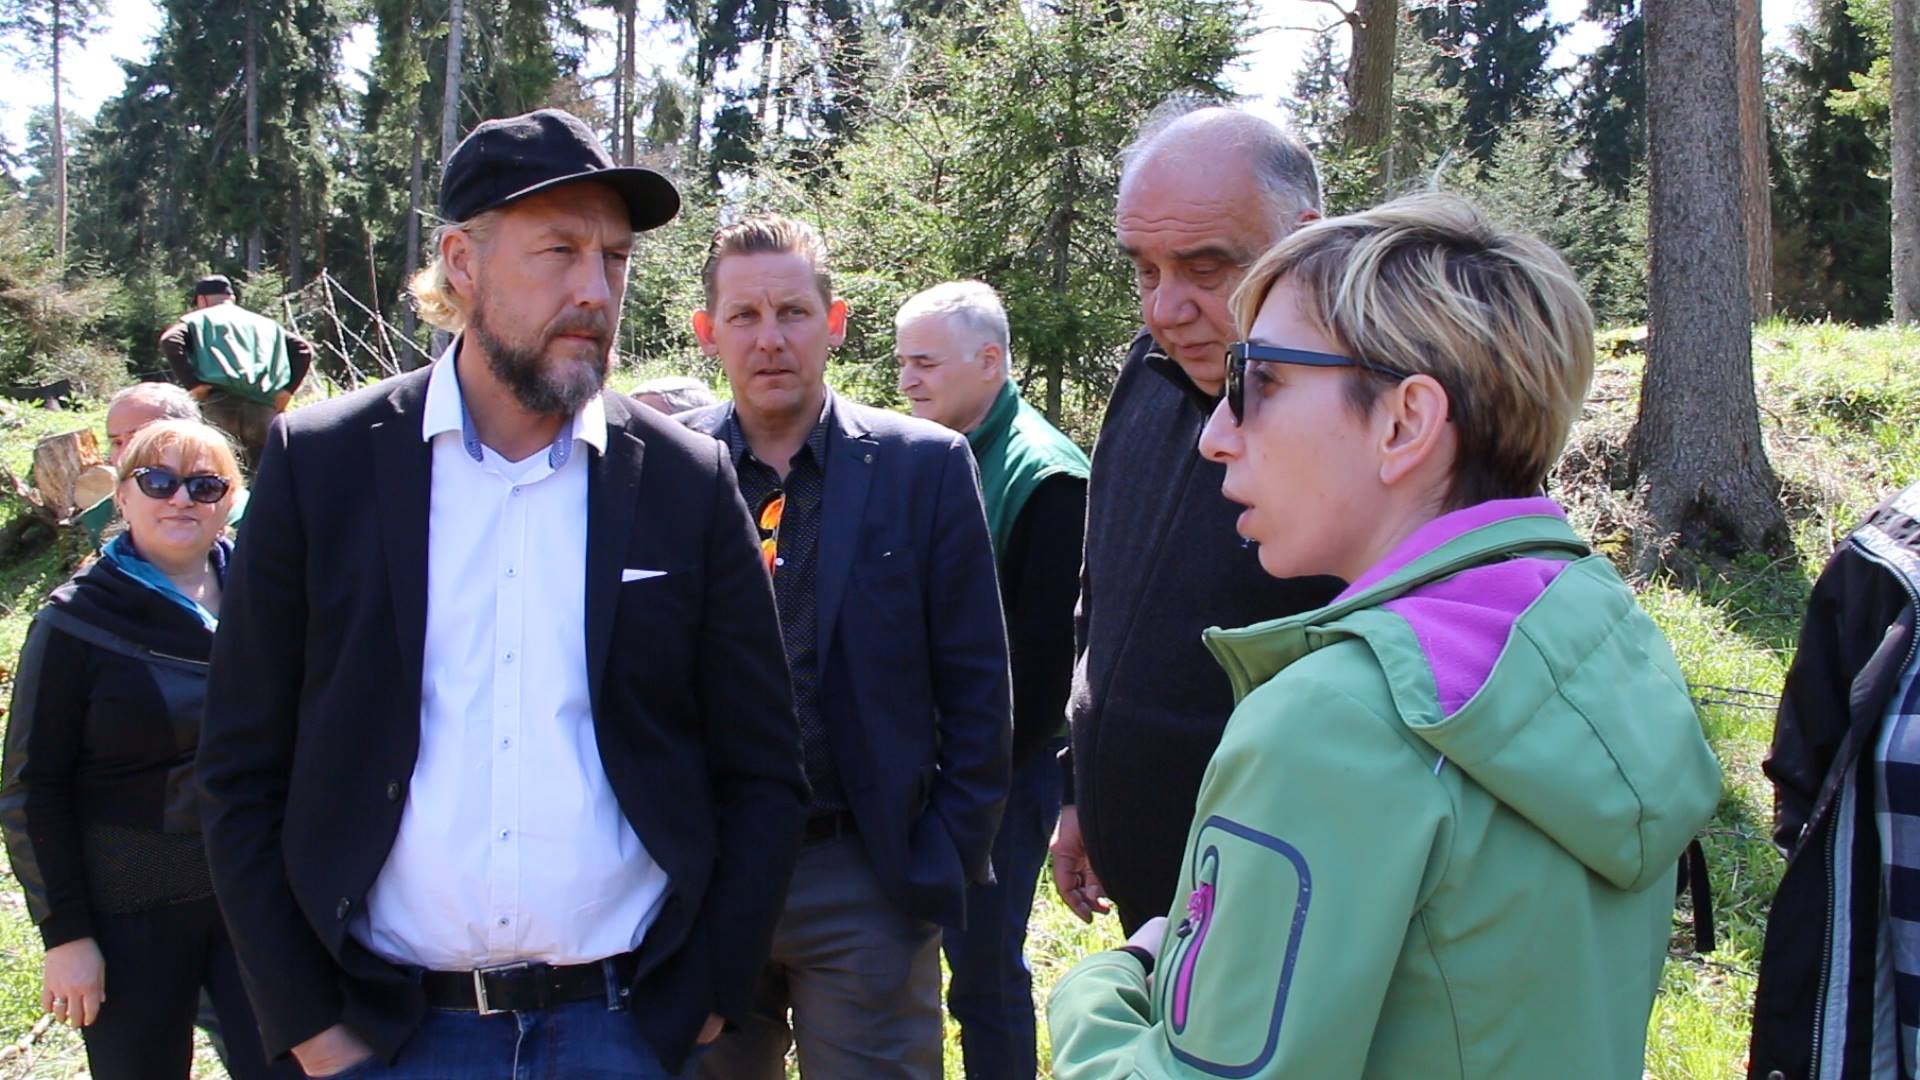 The representatives of the Trade Union of Sweden visited Borjomi Gorge